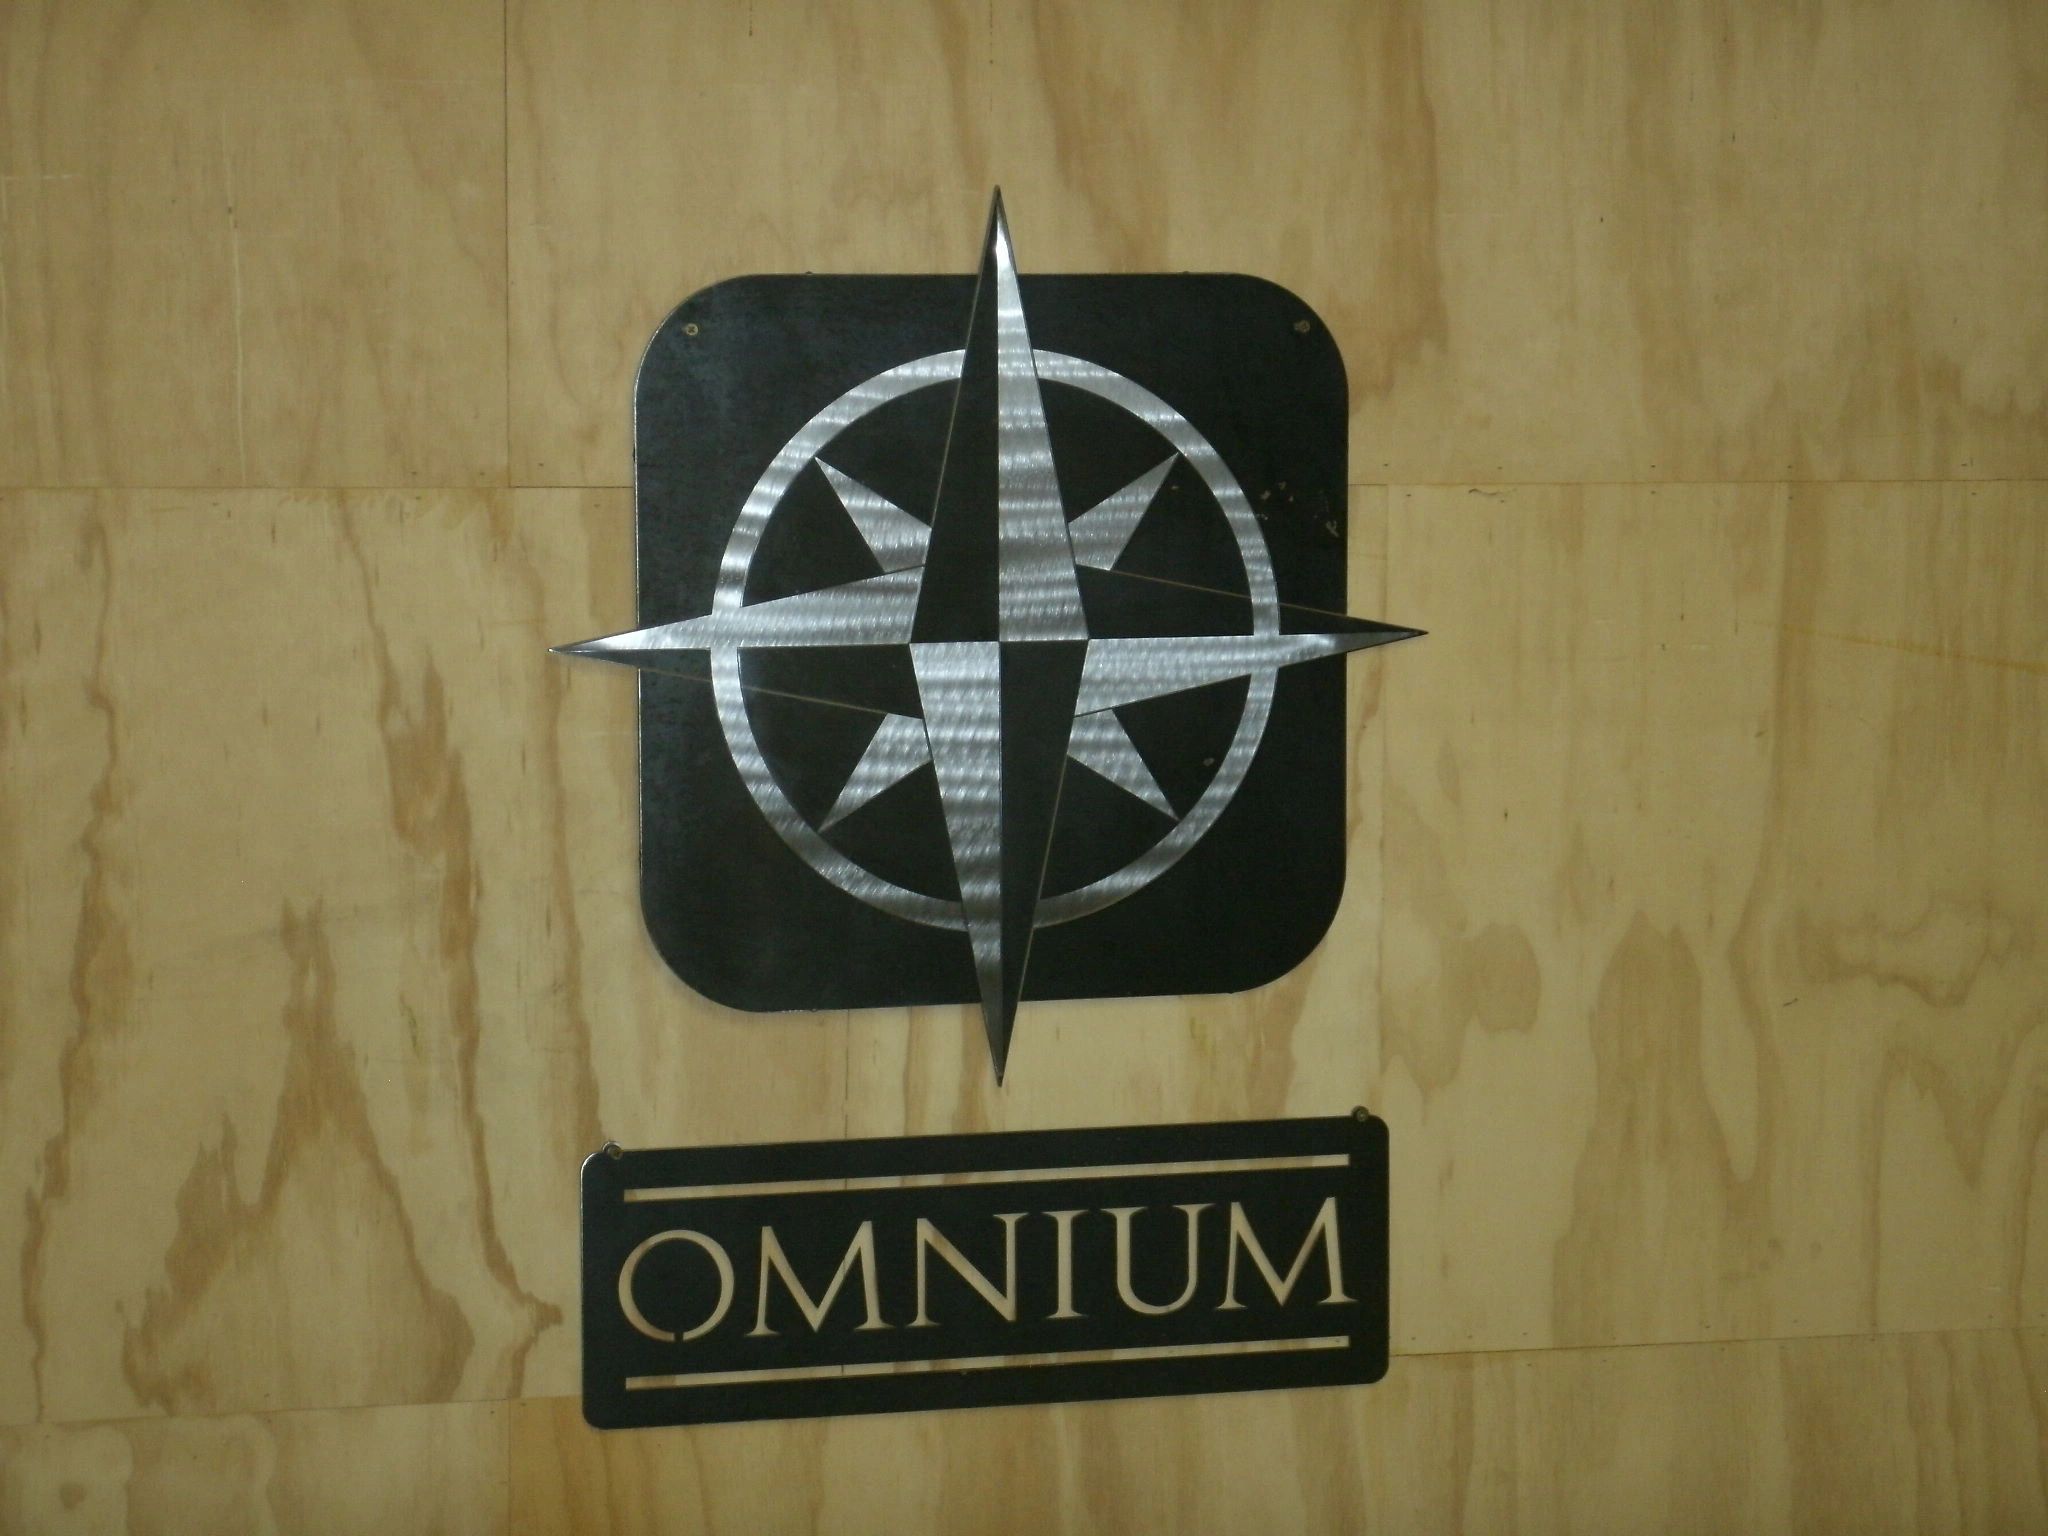 Custom business sign made from stainless steel and plain steel.